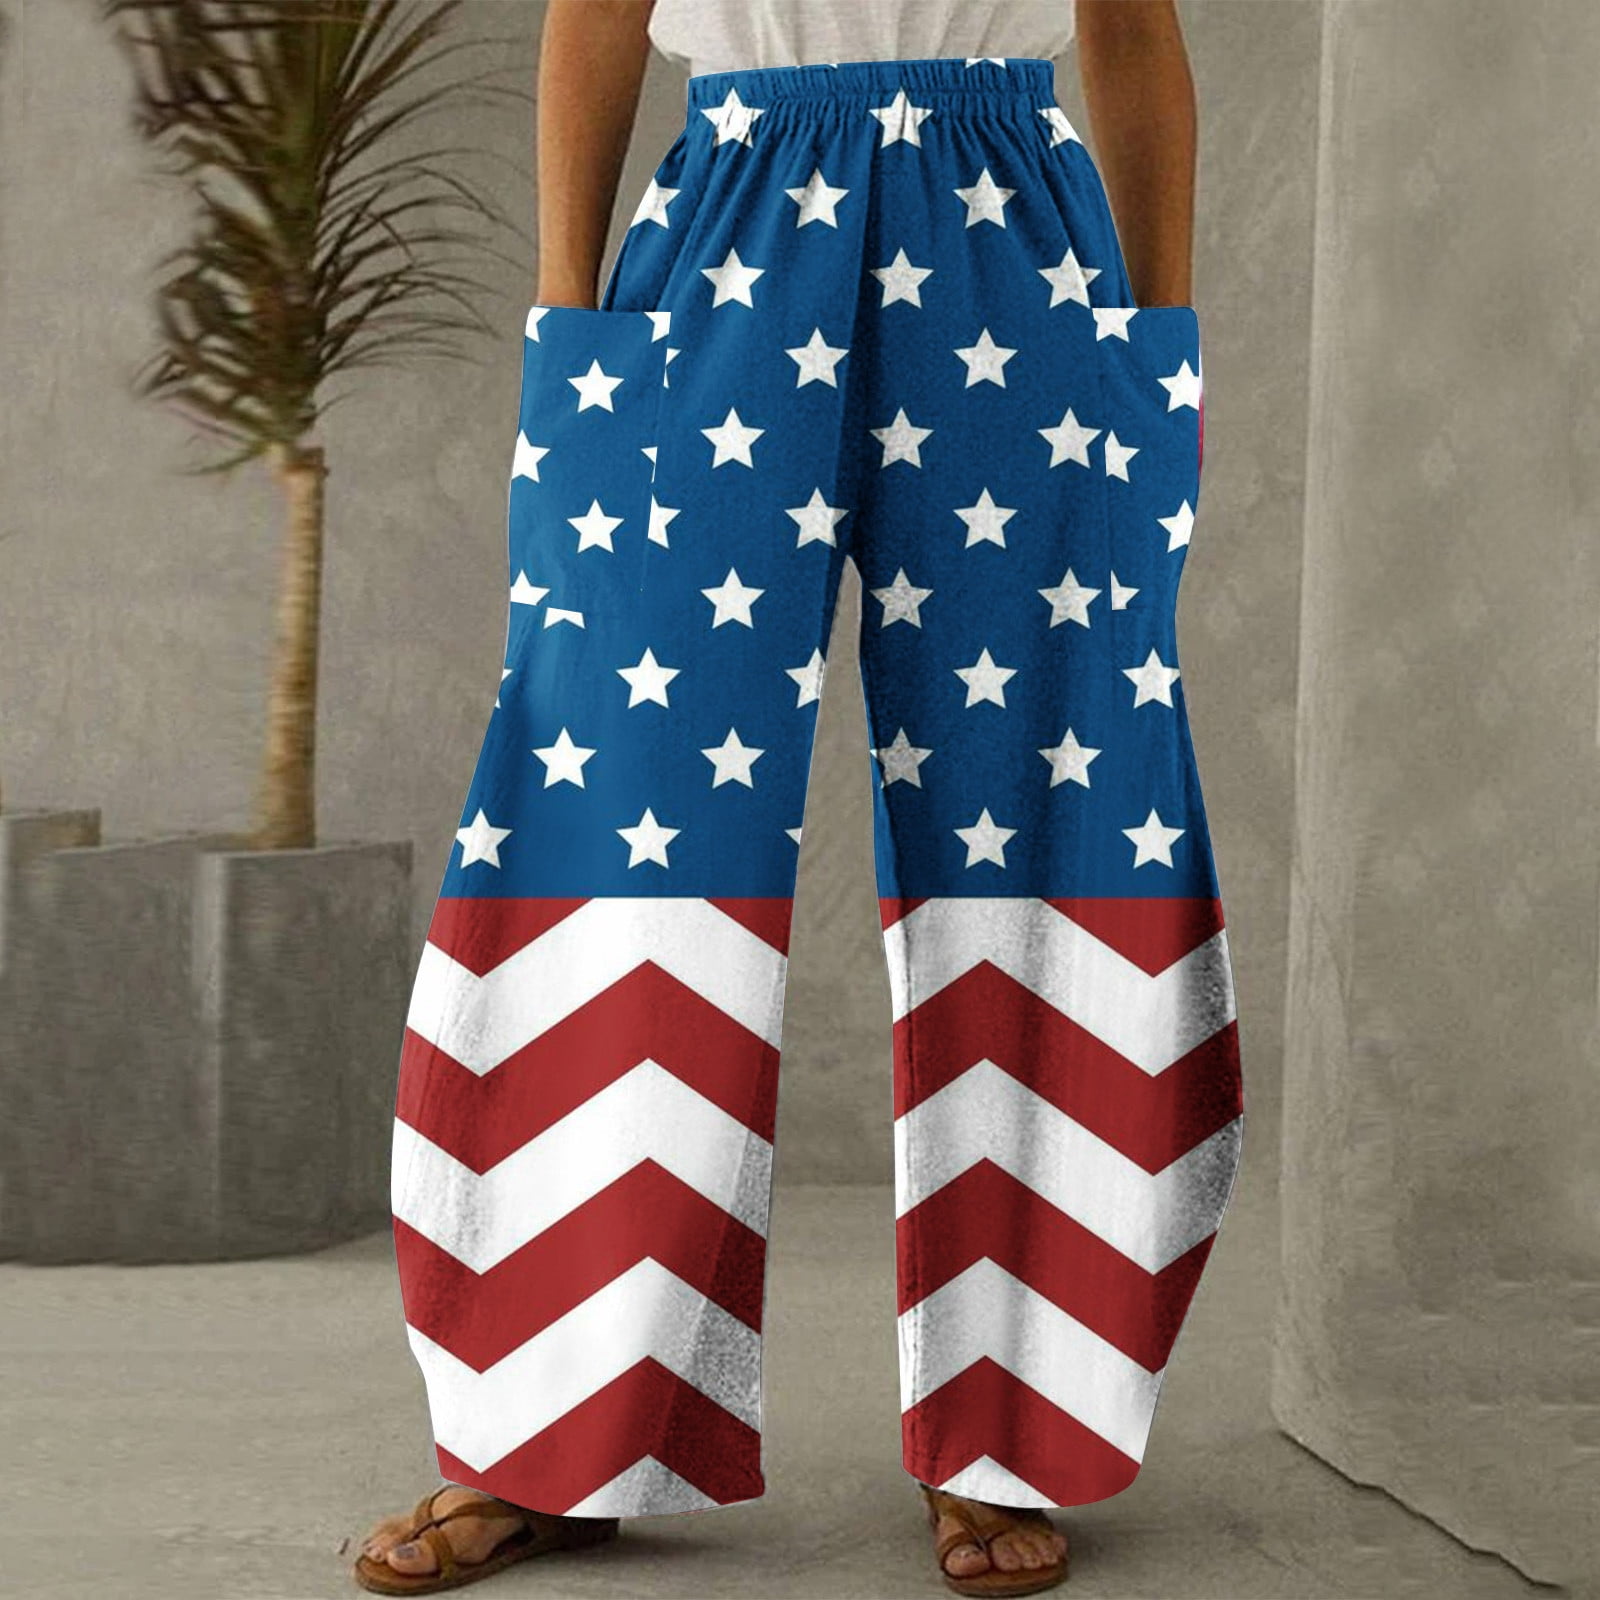 Lilgiuy 4th of July Pants for Women Casual Printing Pockets Elastic Mid ...